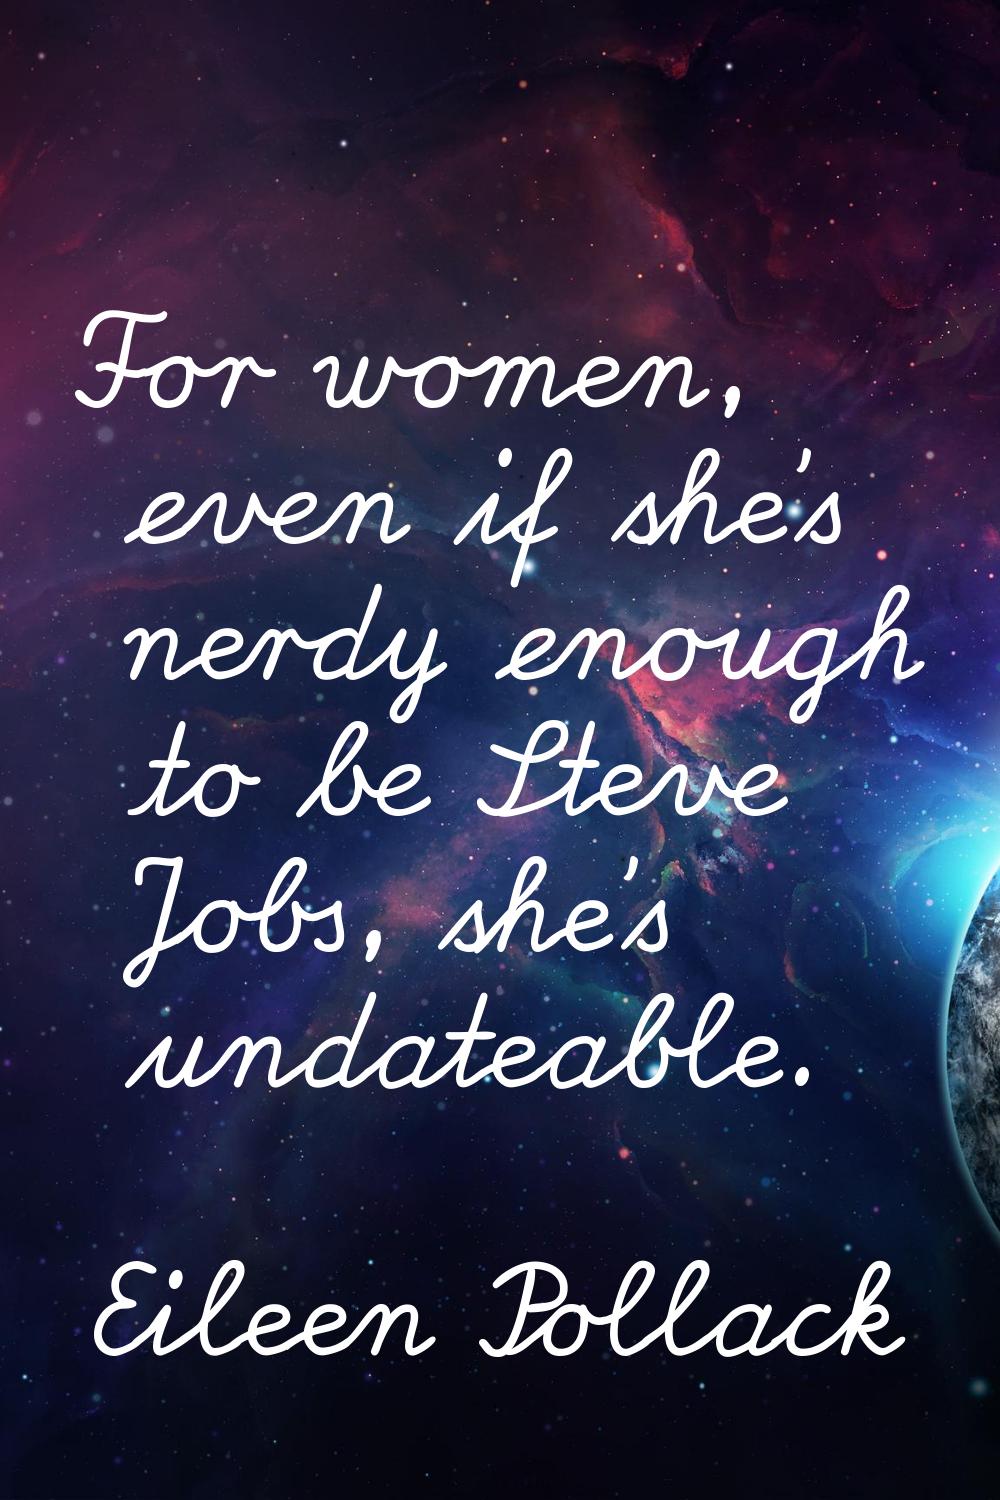 For women, even if she's nerdy enough to be Steve Jobs, she's undateable.